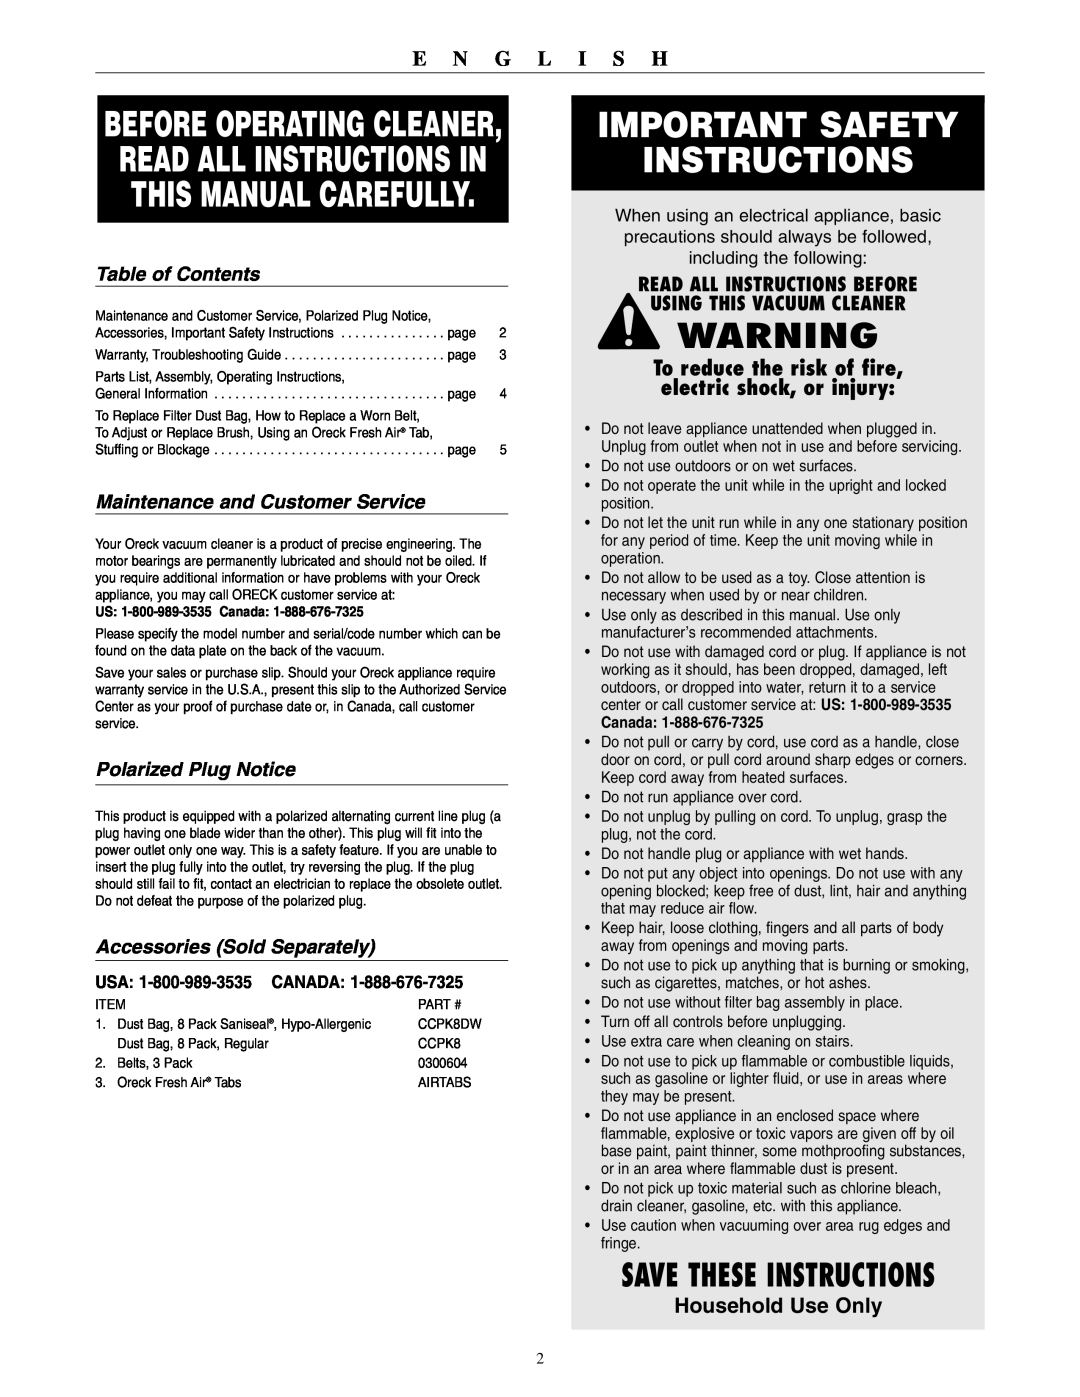 Oreck 2310RS Important Safety Instructions, Household Use Only, Table of Contents, Maintenance and Customer Service 